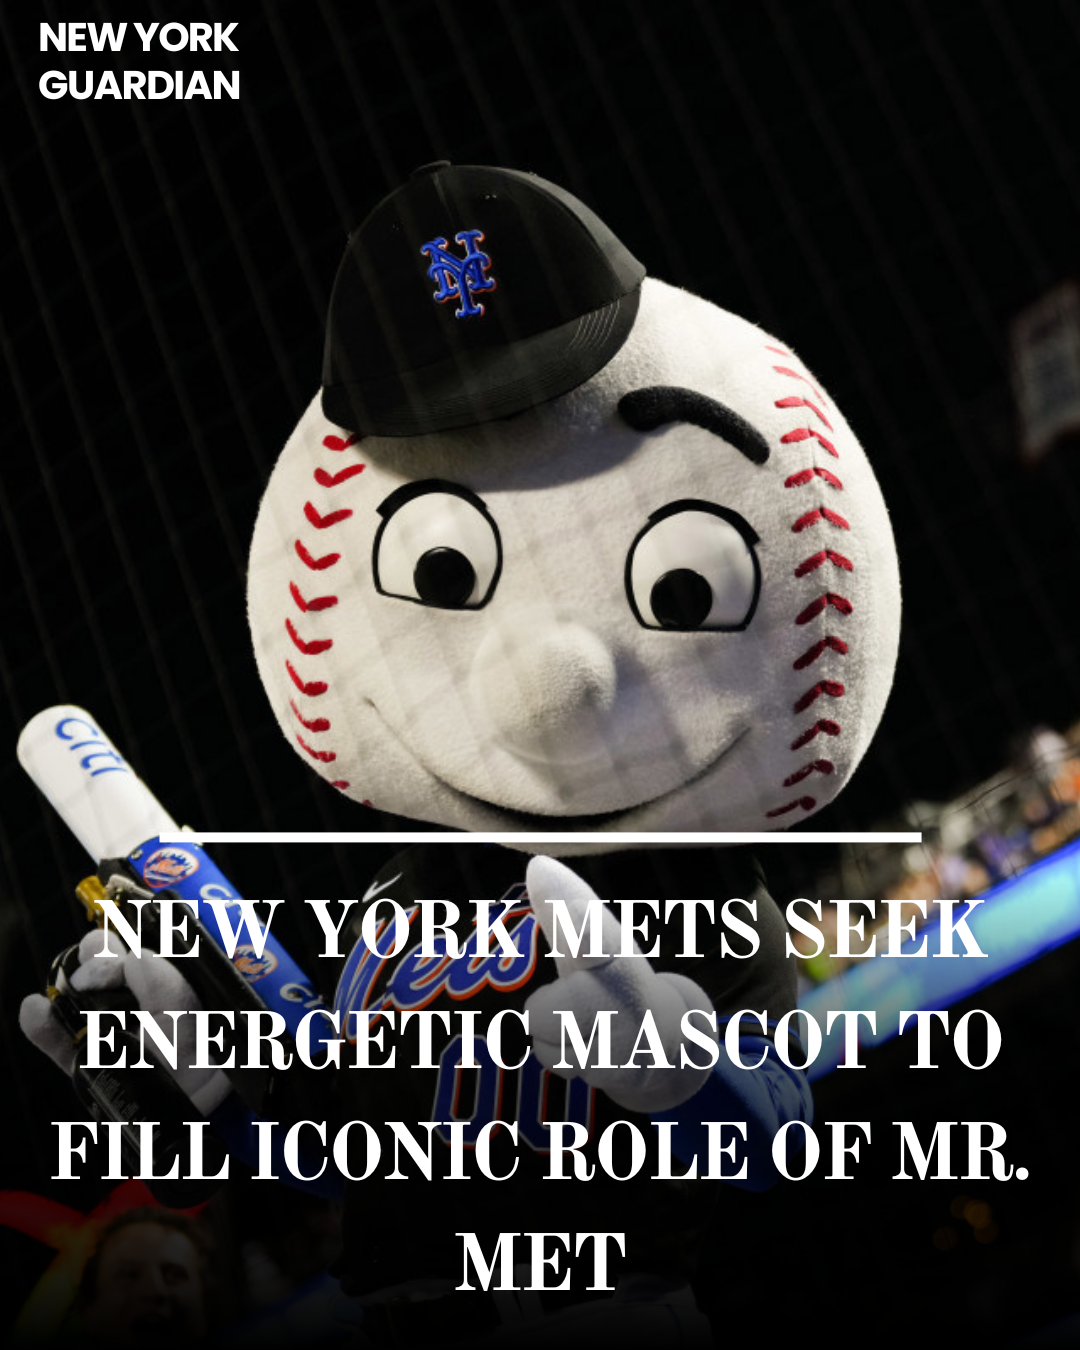 The New York Mets are looking for a dynamic individual to continue the history of one of the most beloved mascots.